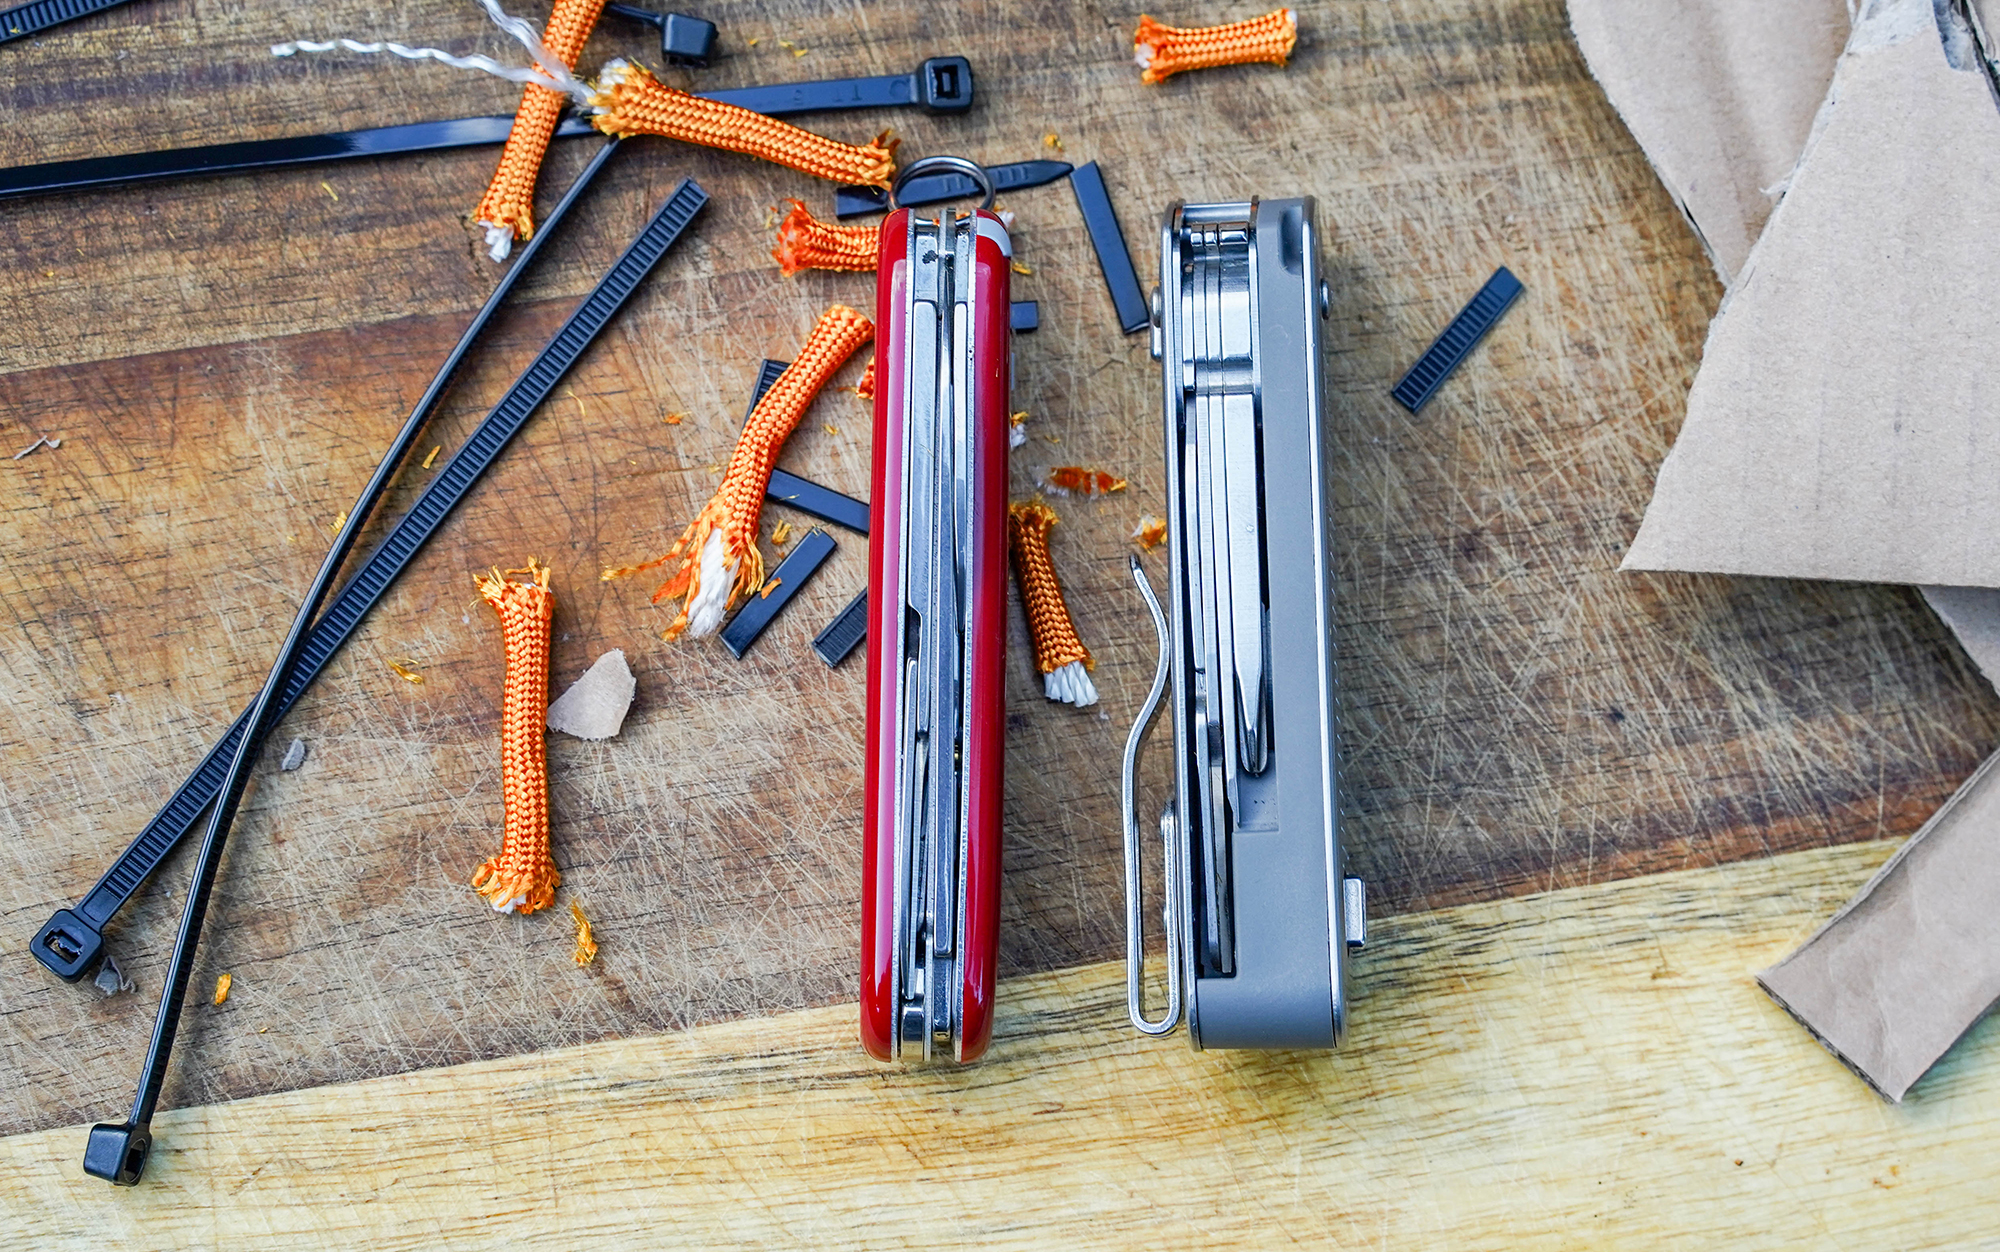 The Compact SAK and Leatherman Free T4 next to each other for size comparison.